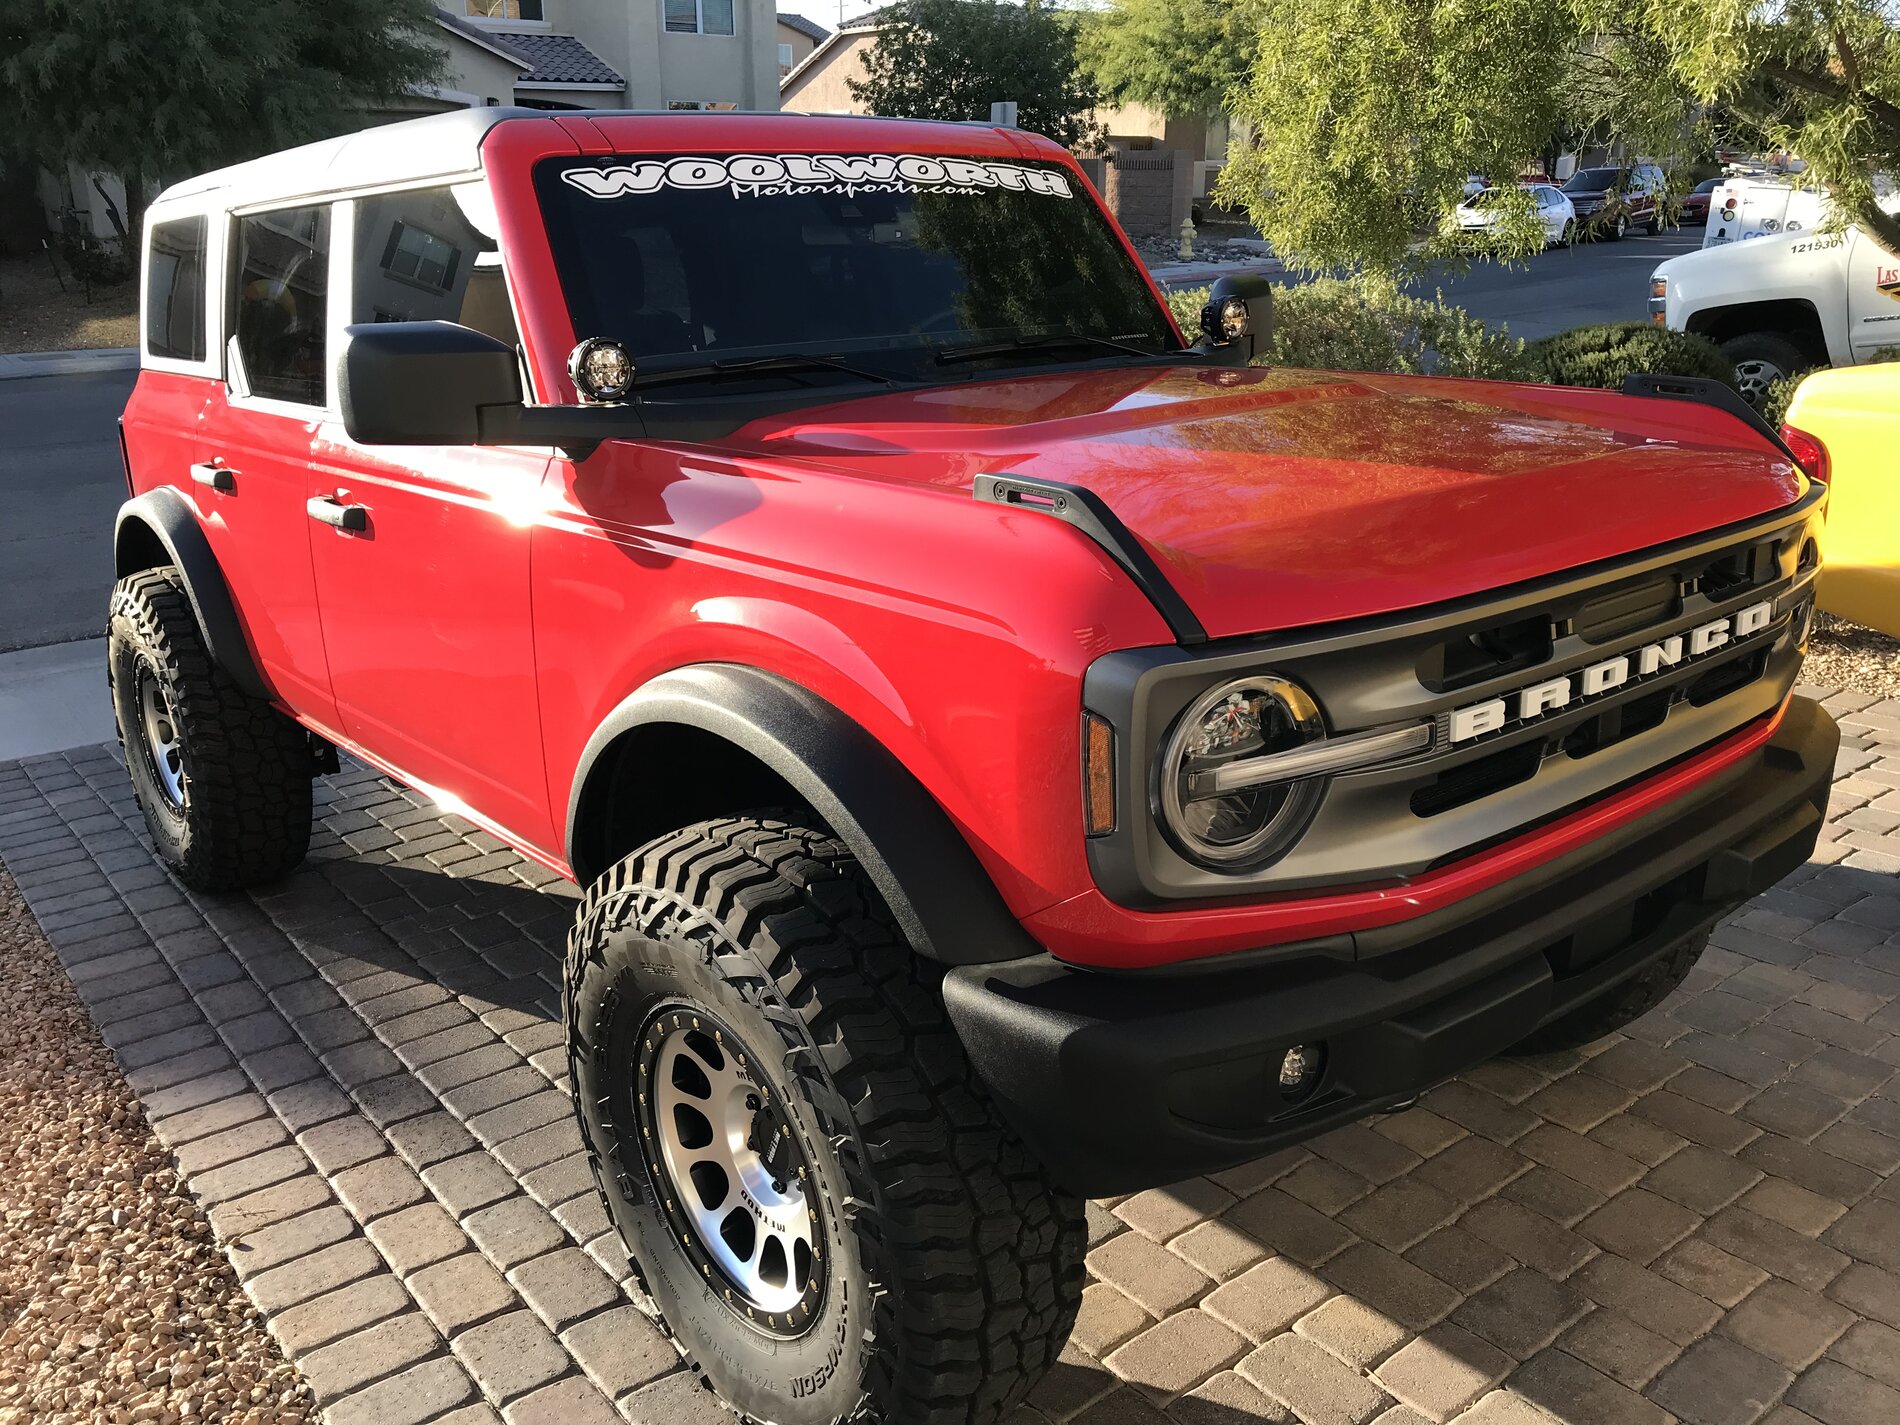 Ford Bronco Race Red on 37’s and FordBroncoLifts level lift kit - 3" front / 2" rear staggered lift 35683885-9707-4F3C-8108-C53626CC5A58